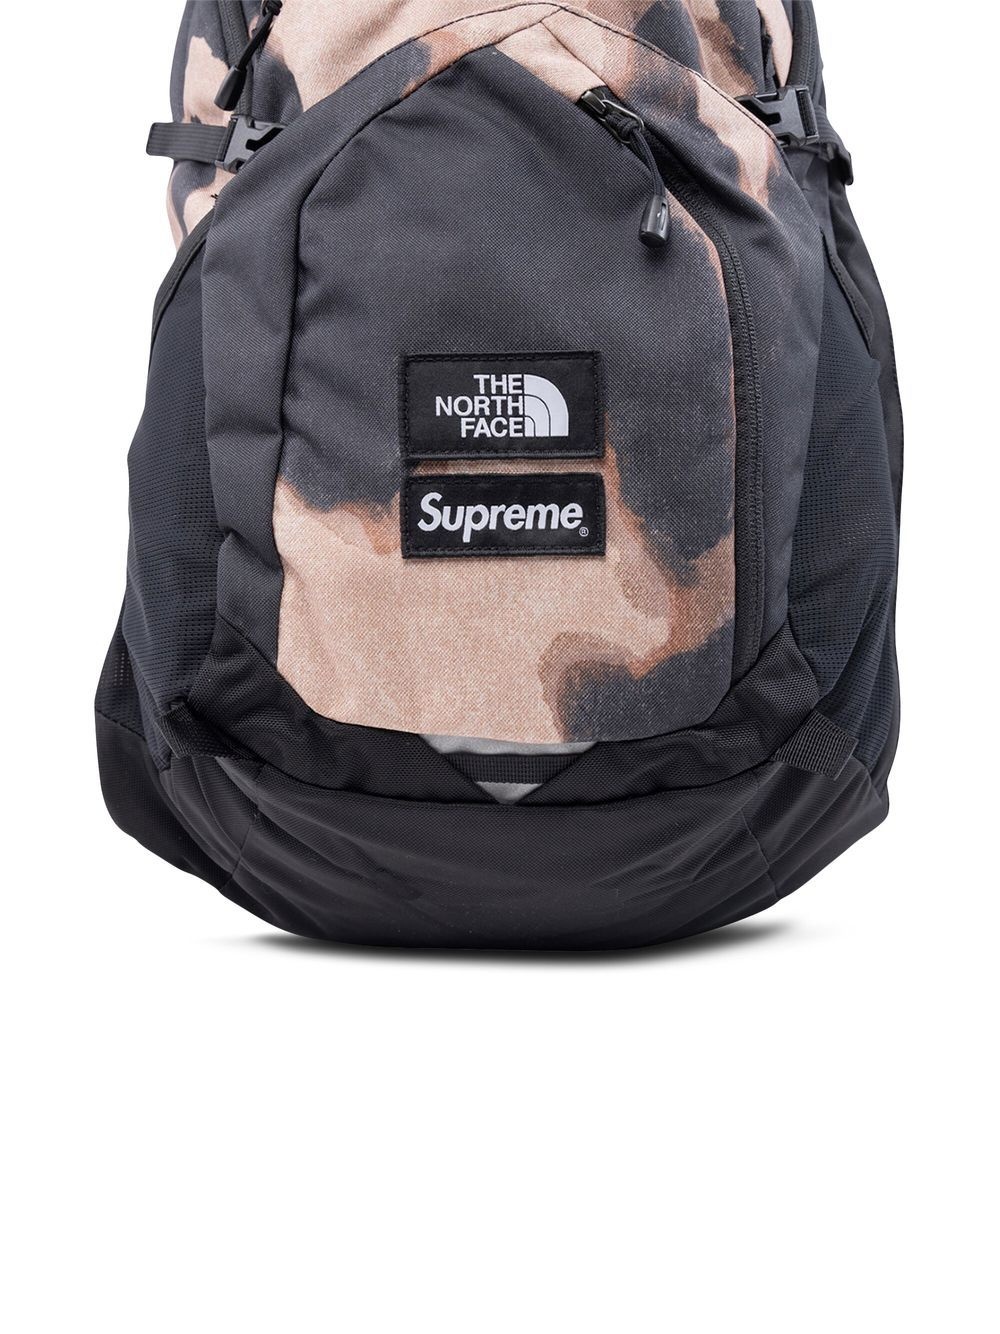 Supreme x The North Face bleach-effect Pocono backpack | REVERSIBLE